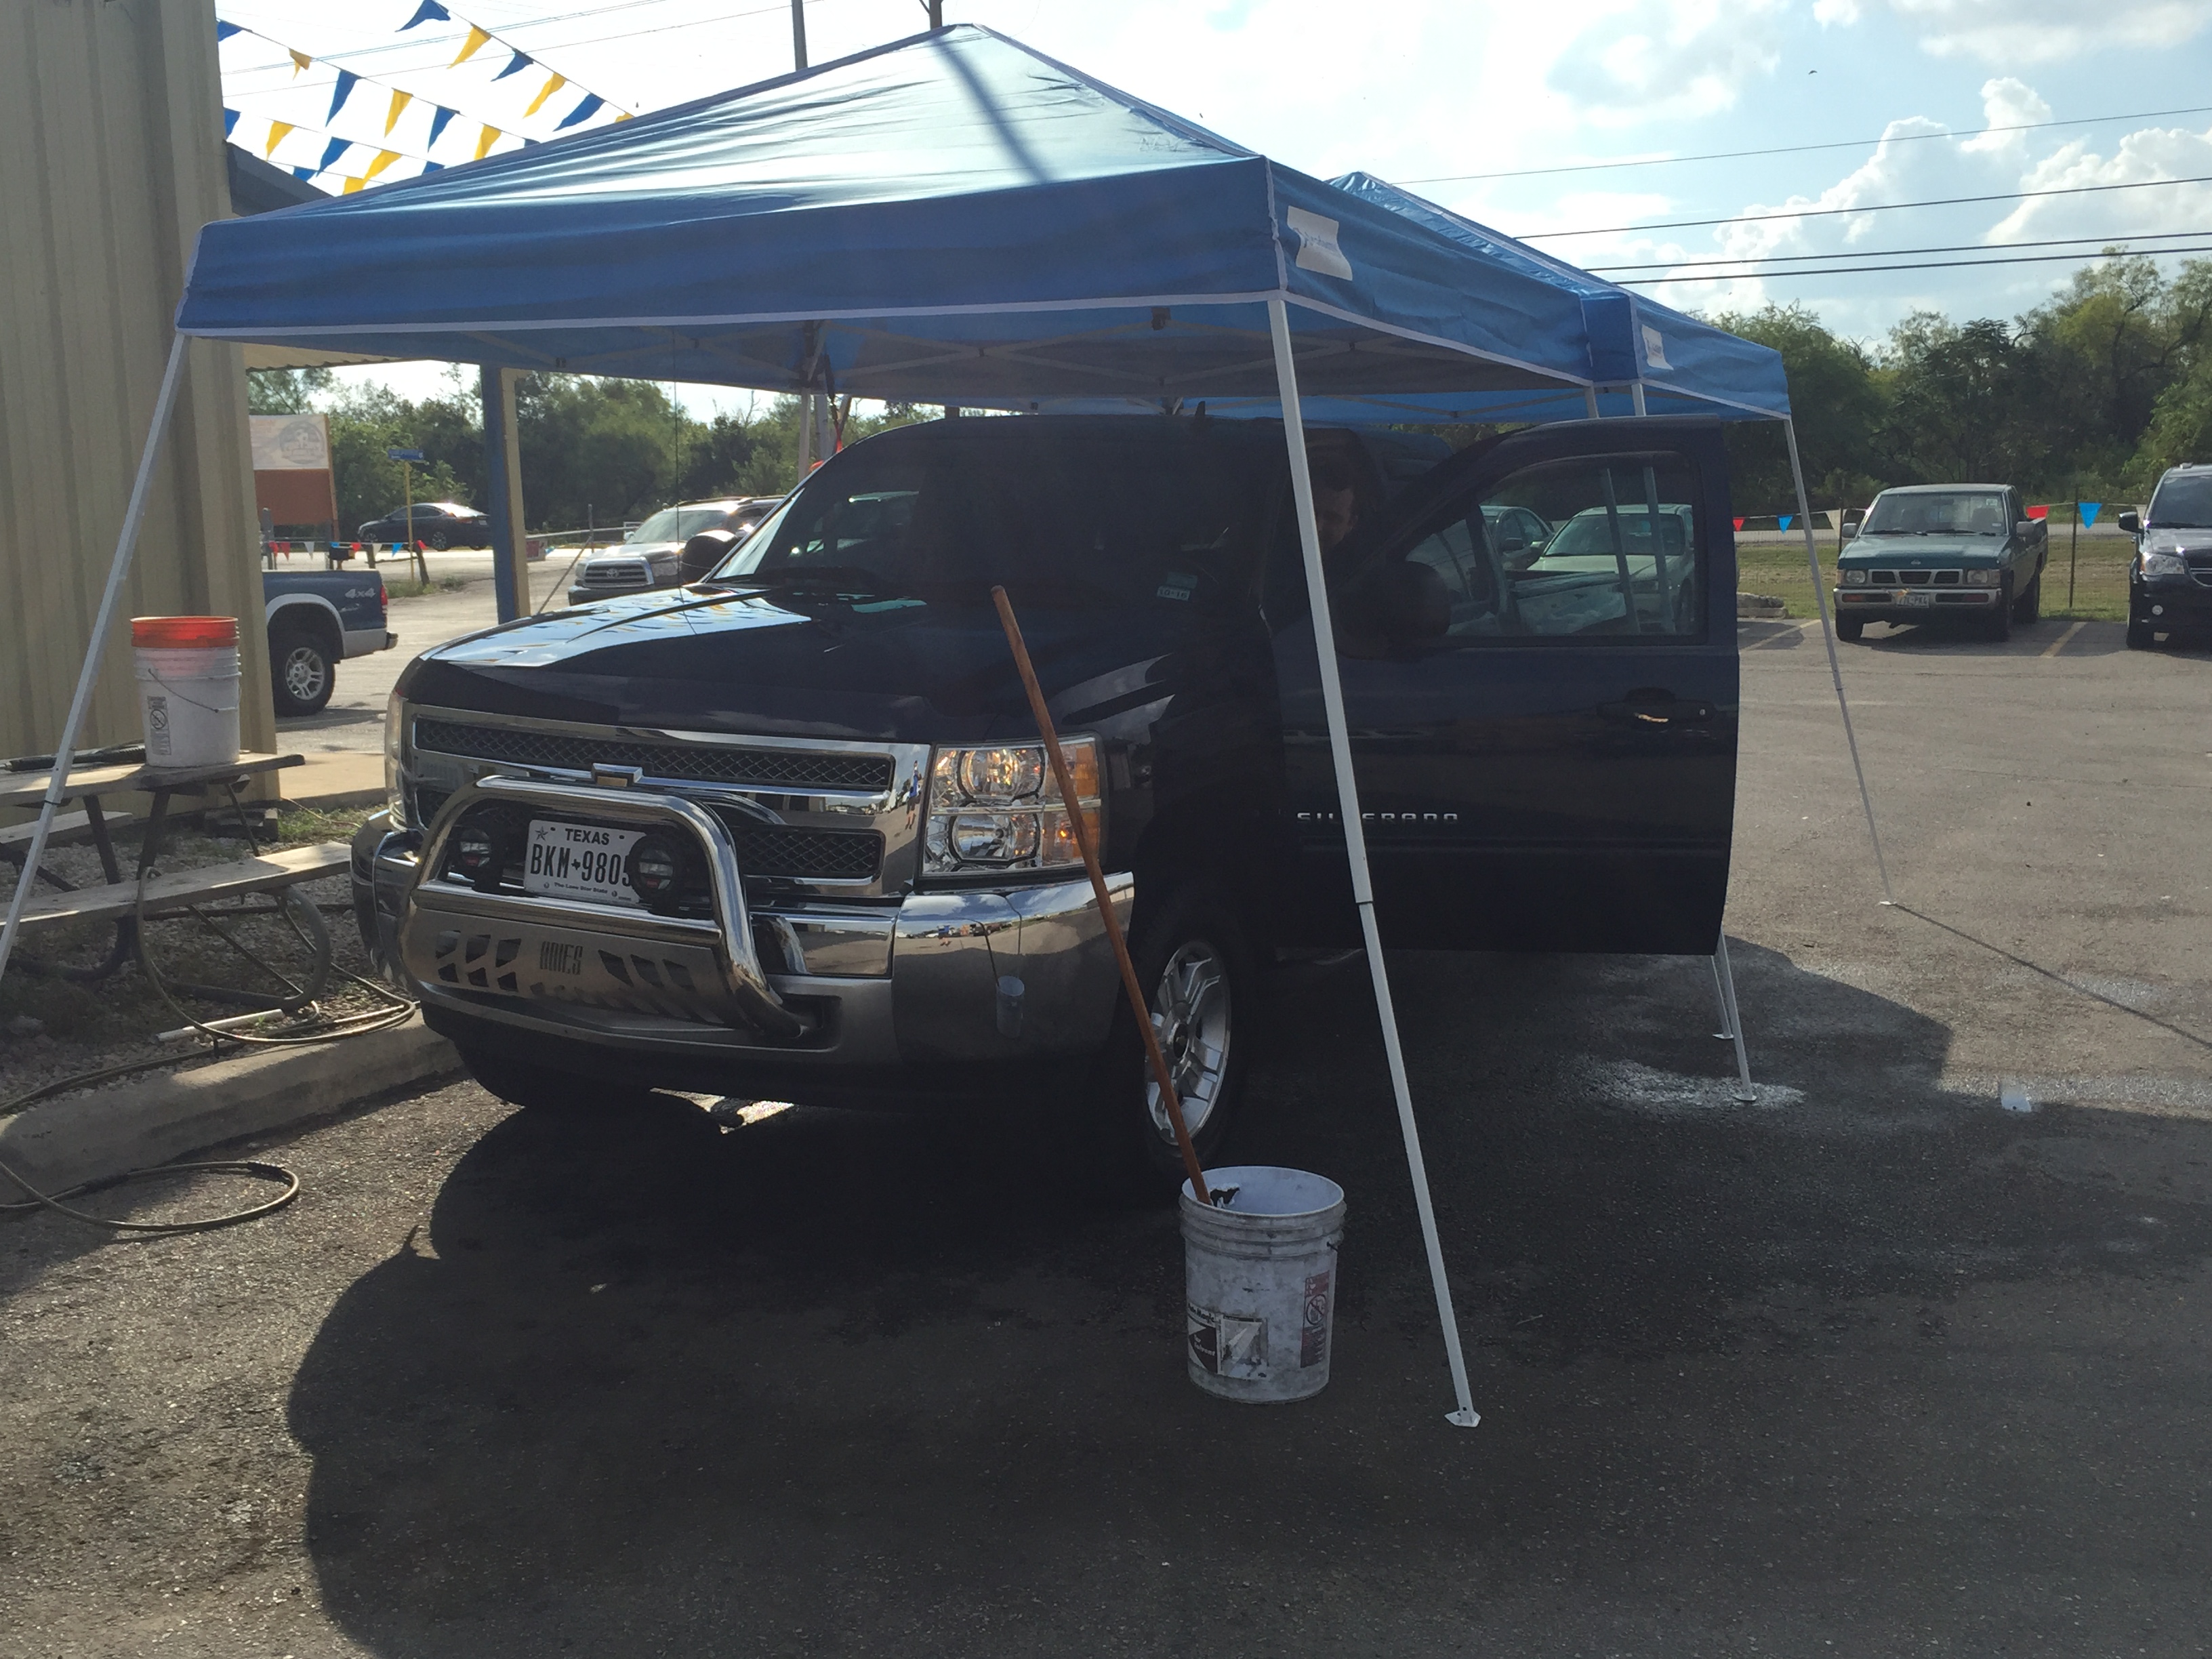 CAR WASH AND DETAIL SERVICES AT EDDIE’s AUTOMOTIVE